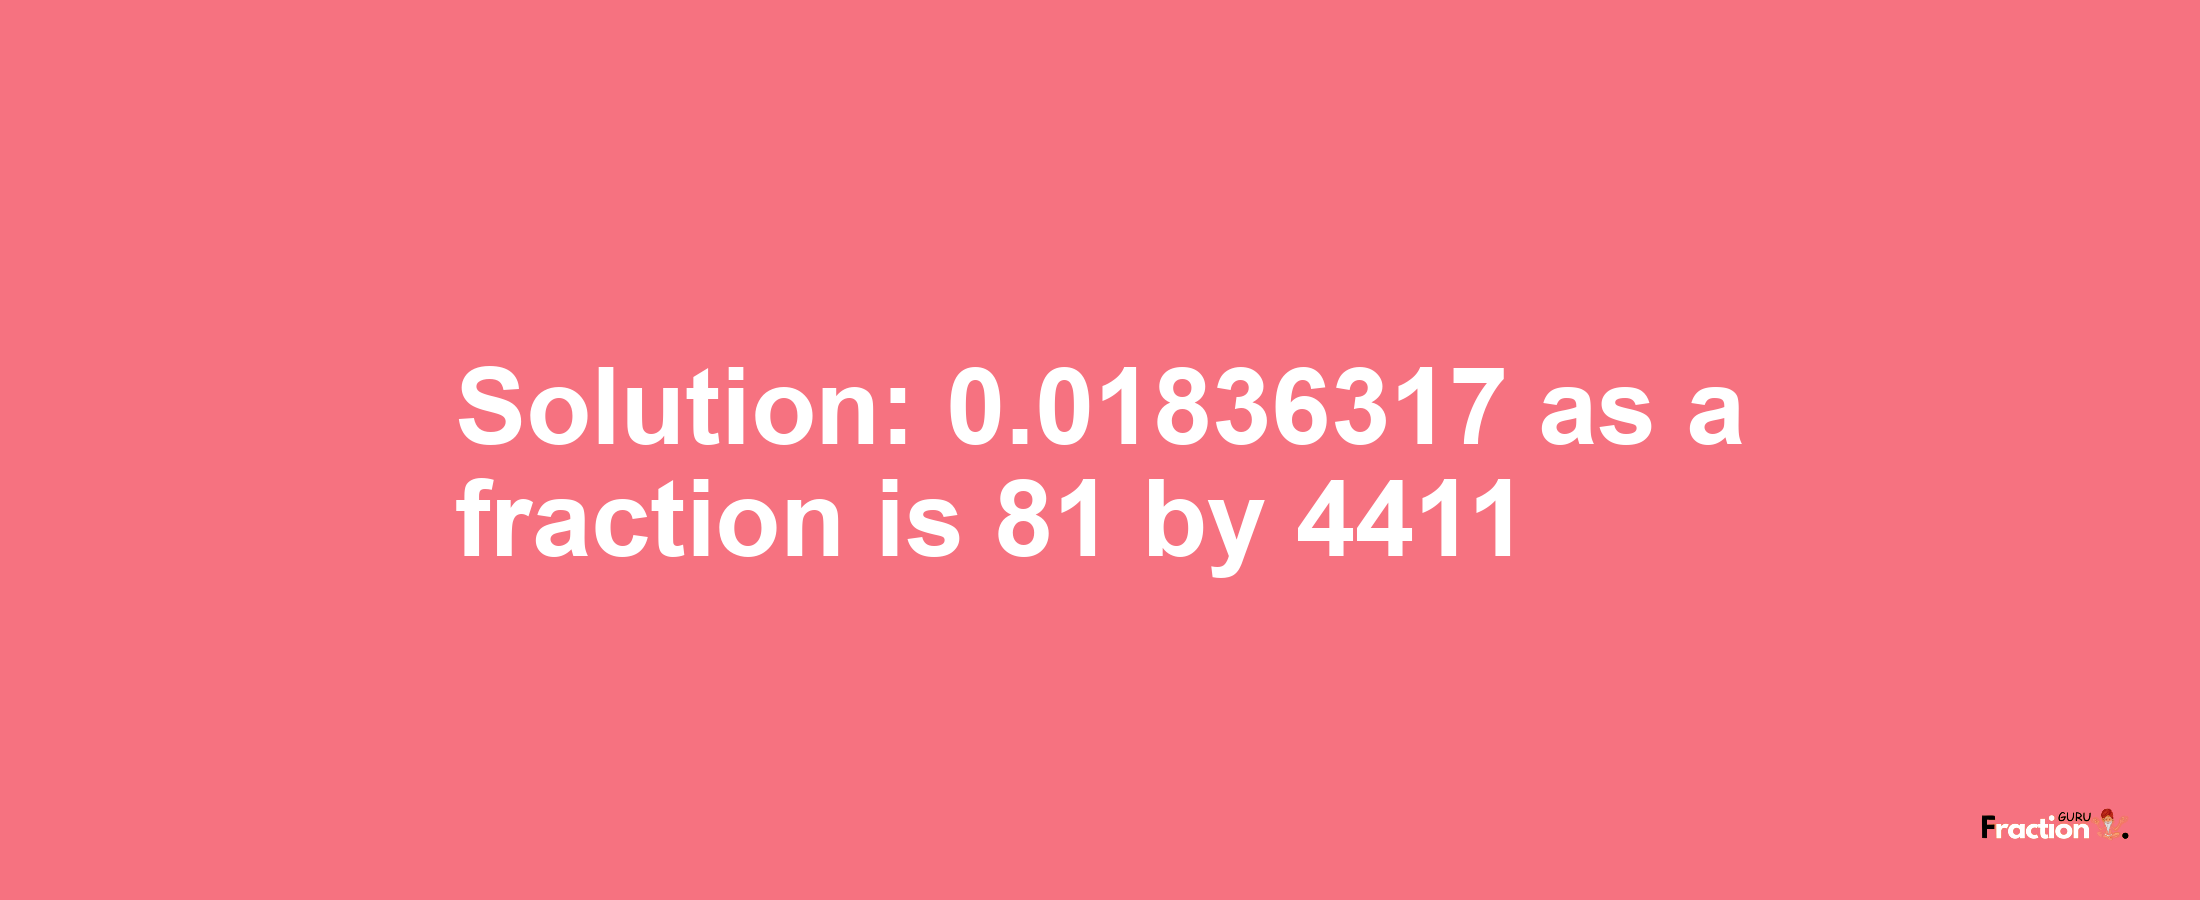 Solution:0.01836317 as a fraction is 81/4411